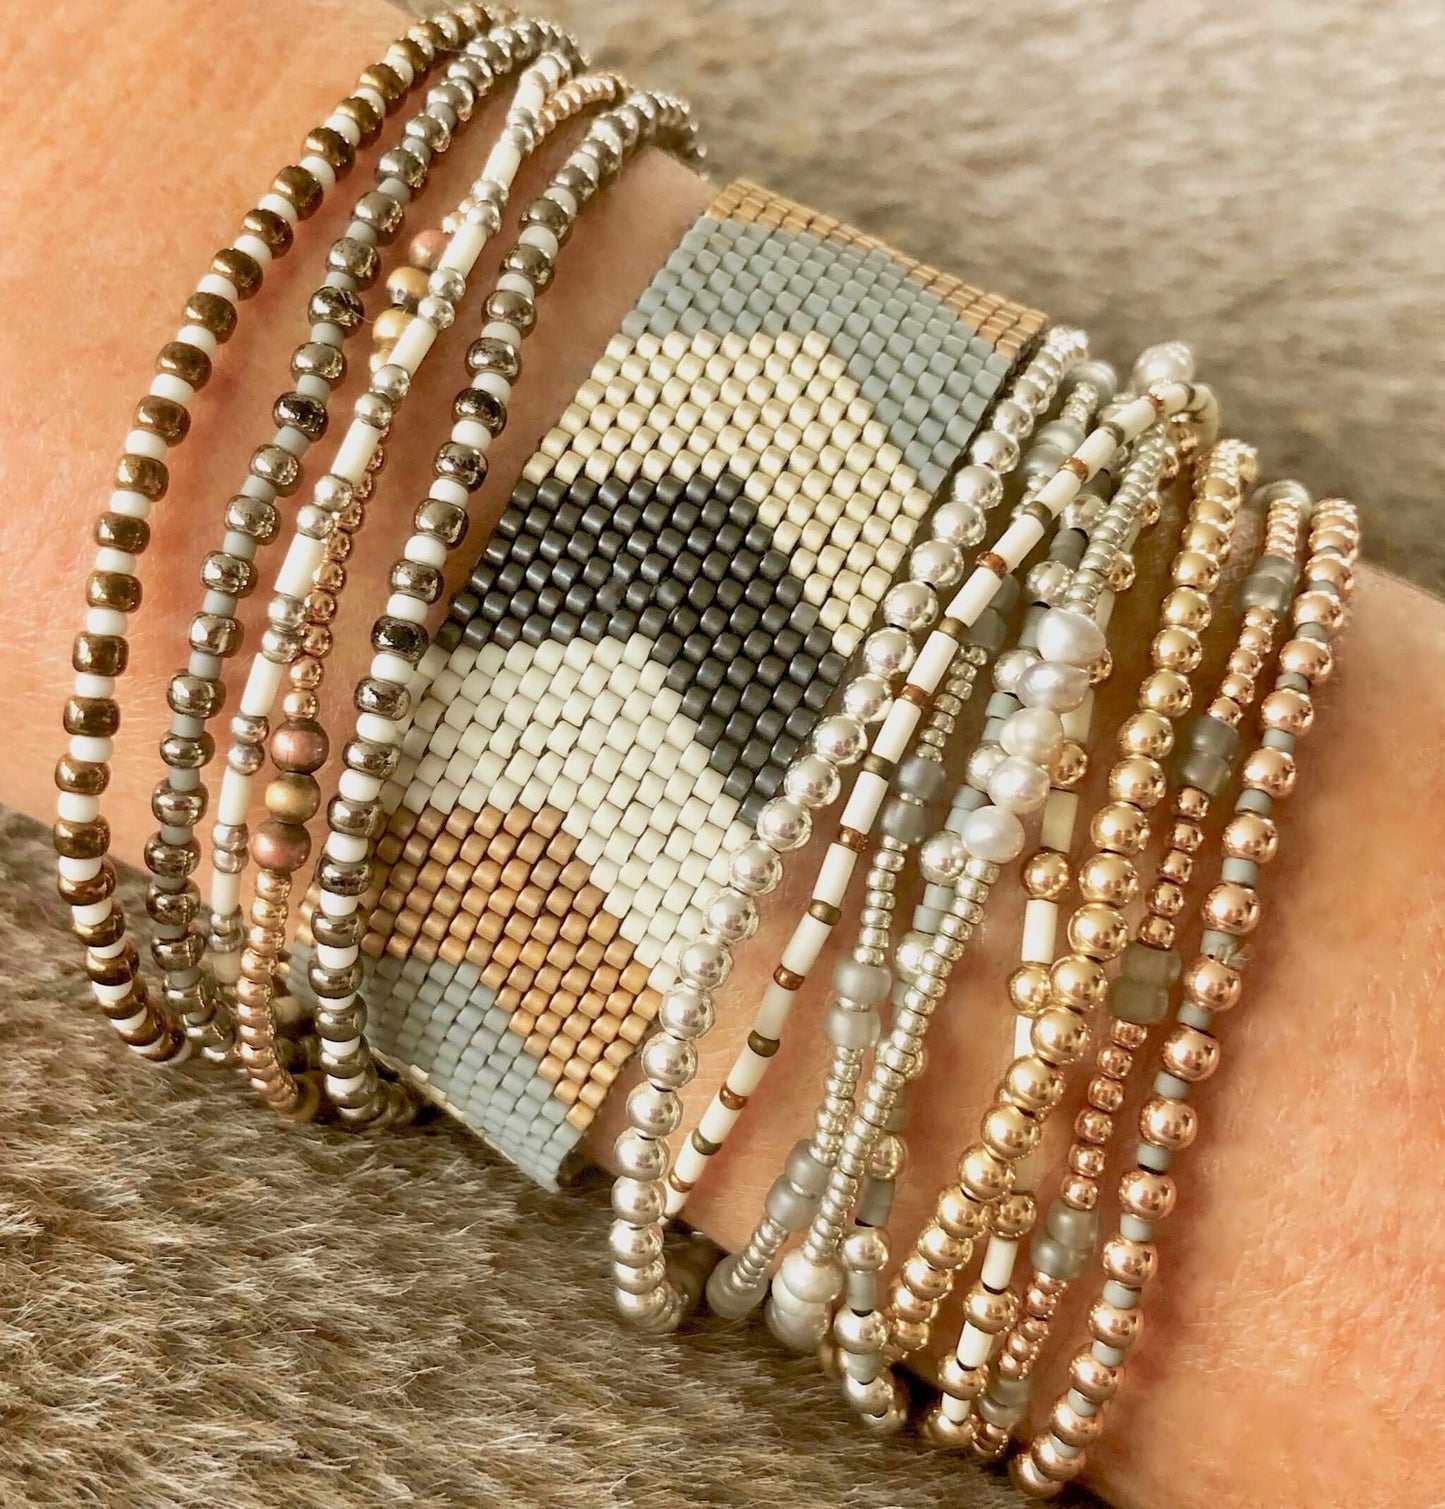 Edgy hippie chic beaded bracelet stack with neutral tones and mixed metals. A stylish matte chevron cuff and skinny beaded stretch bracelets.